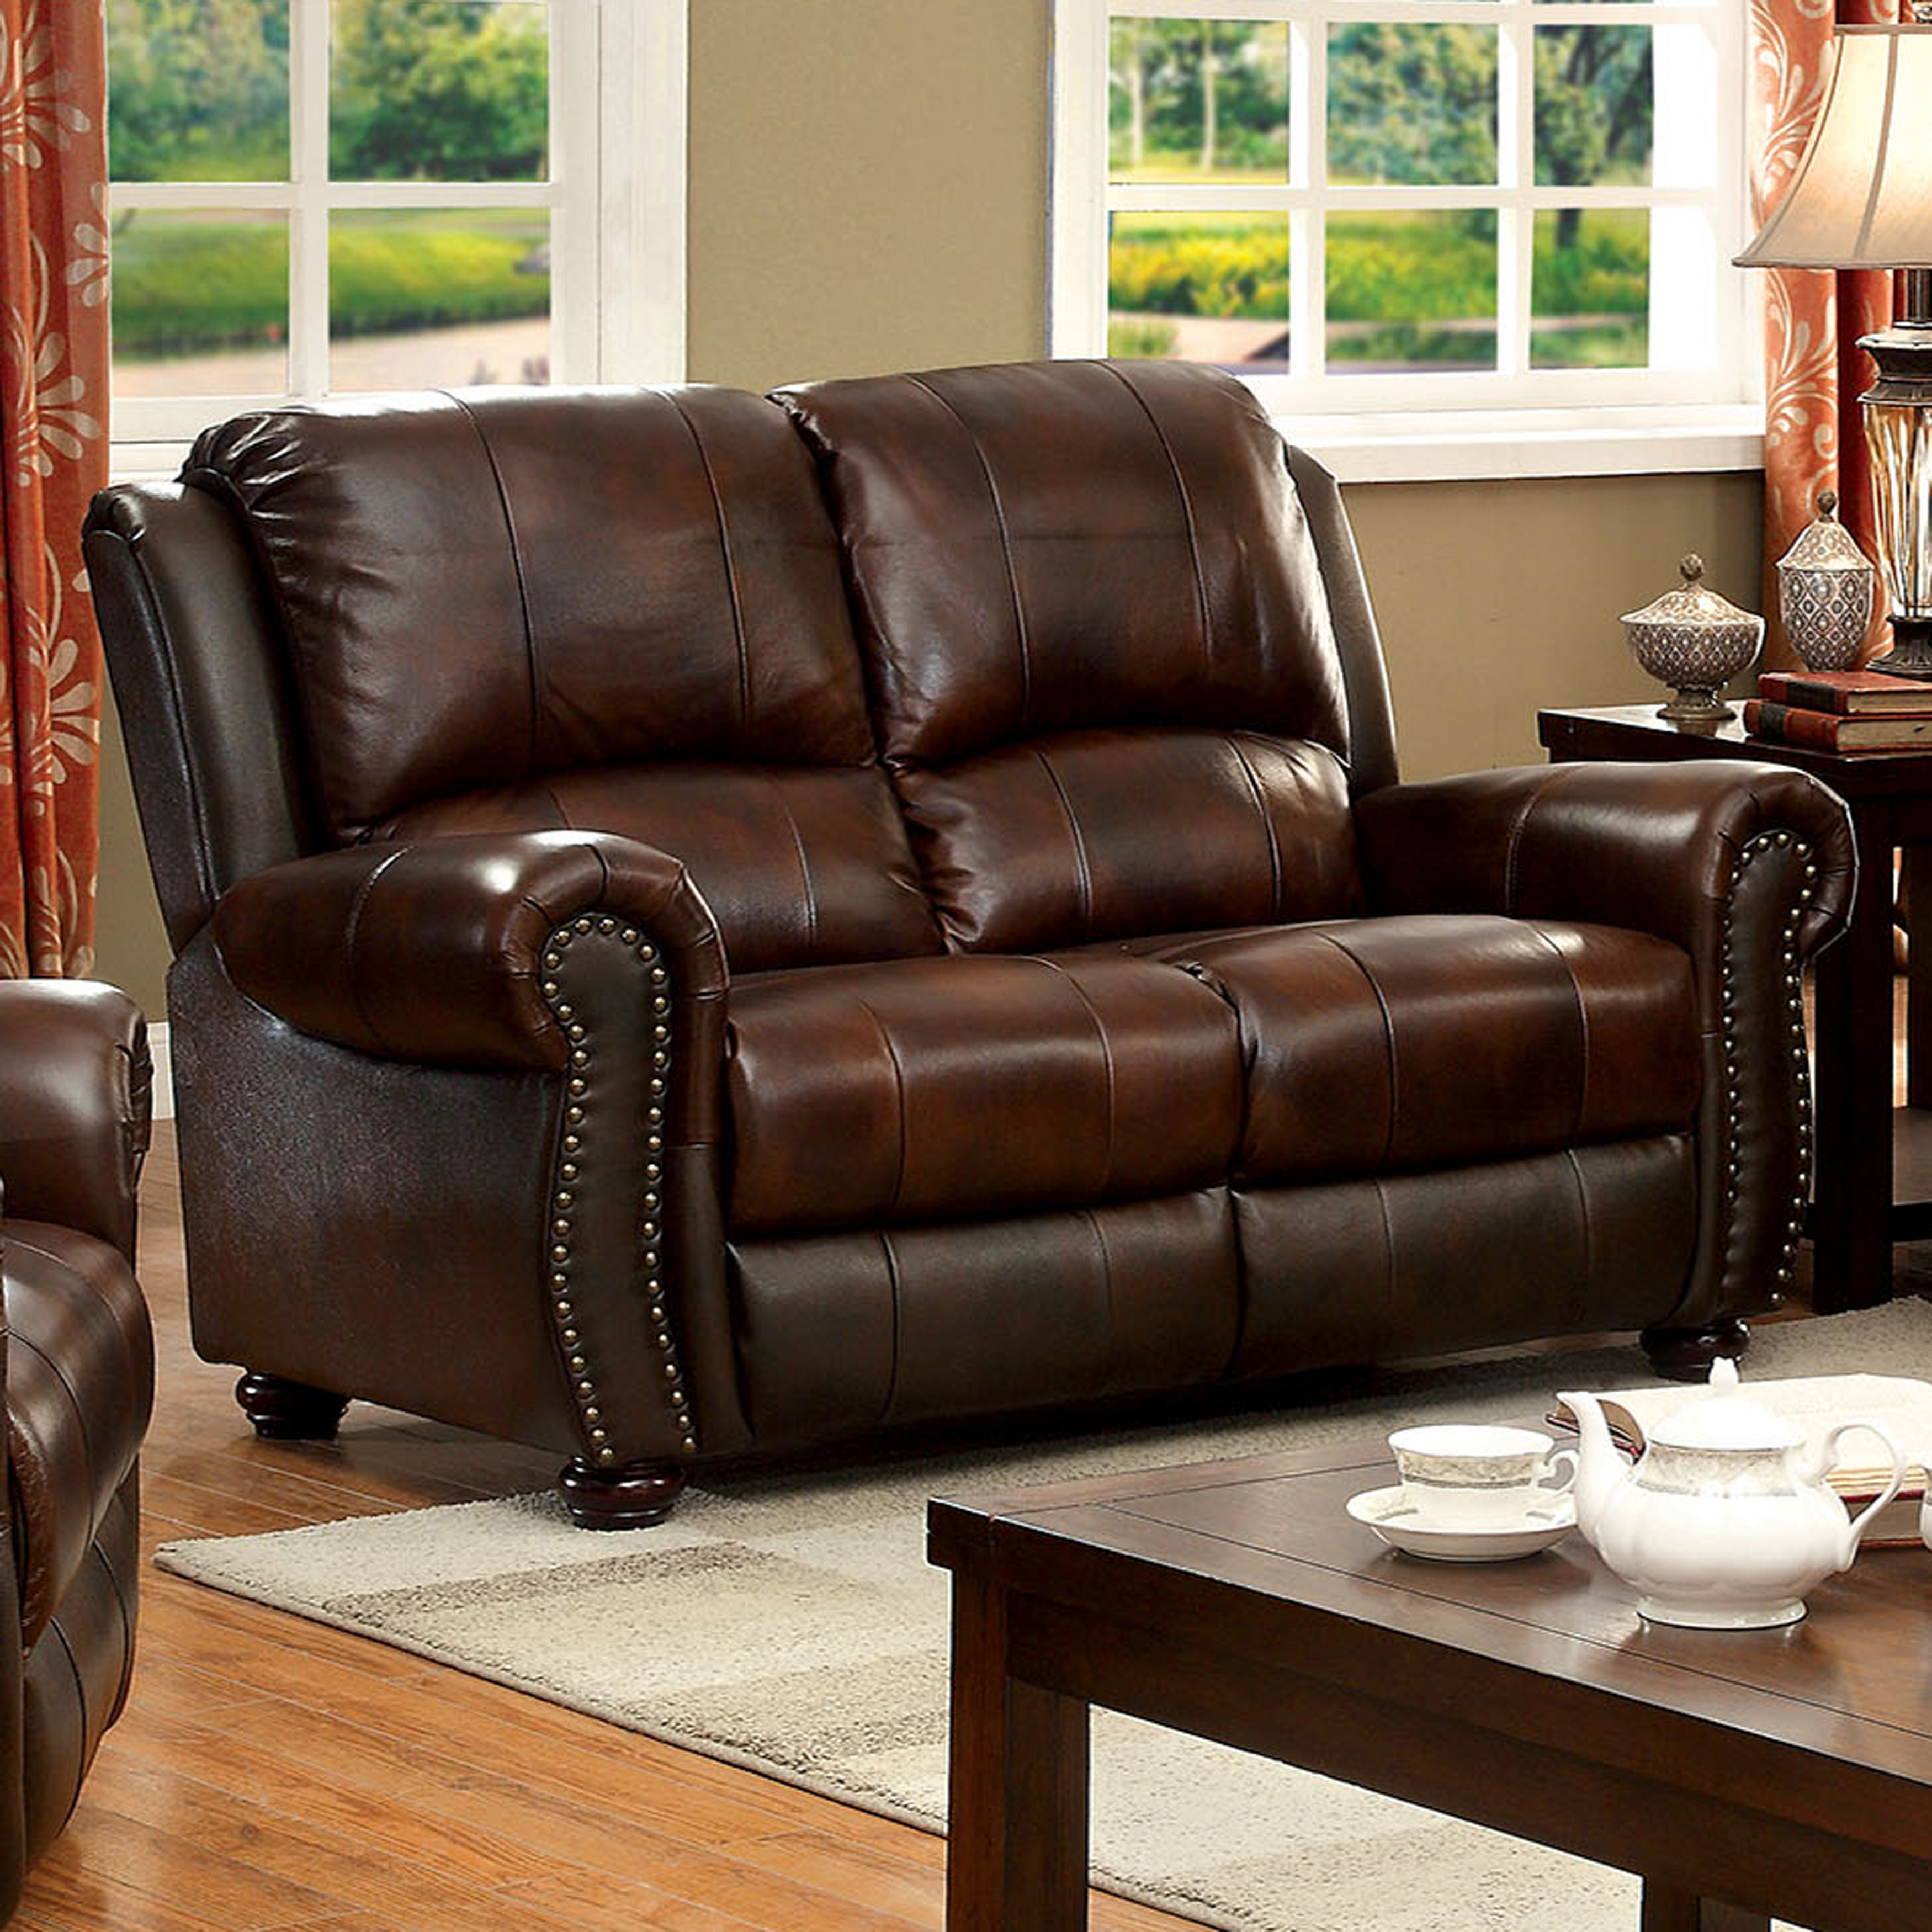 Furniture of America Tad's Top Grain Leather Matchove Loveseat